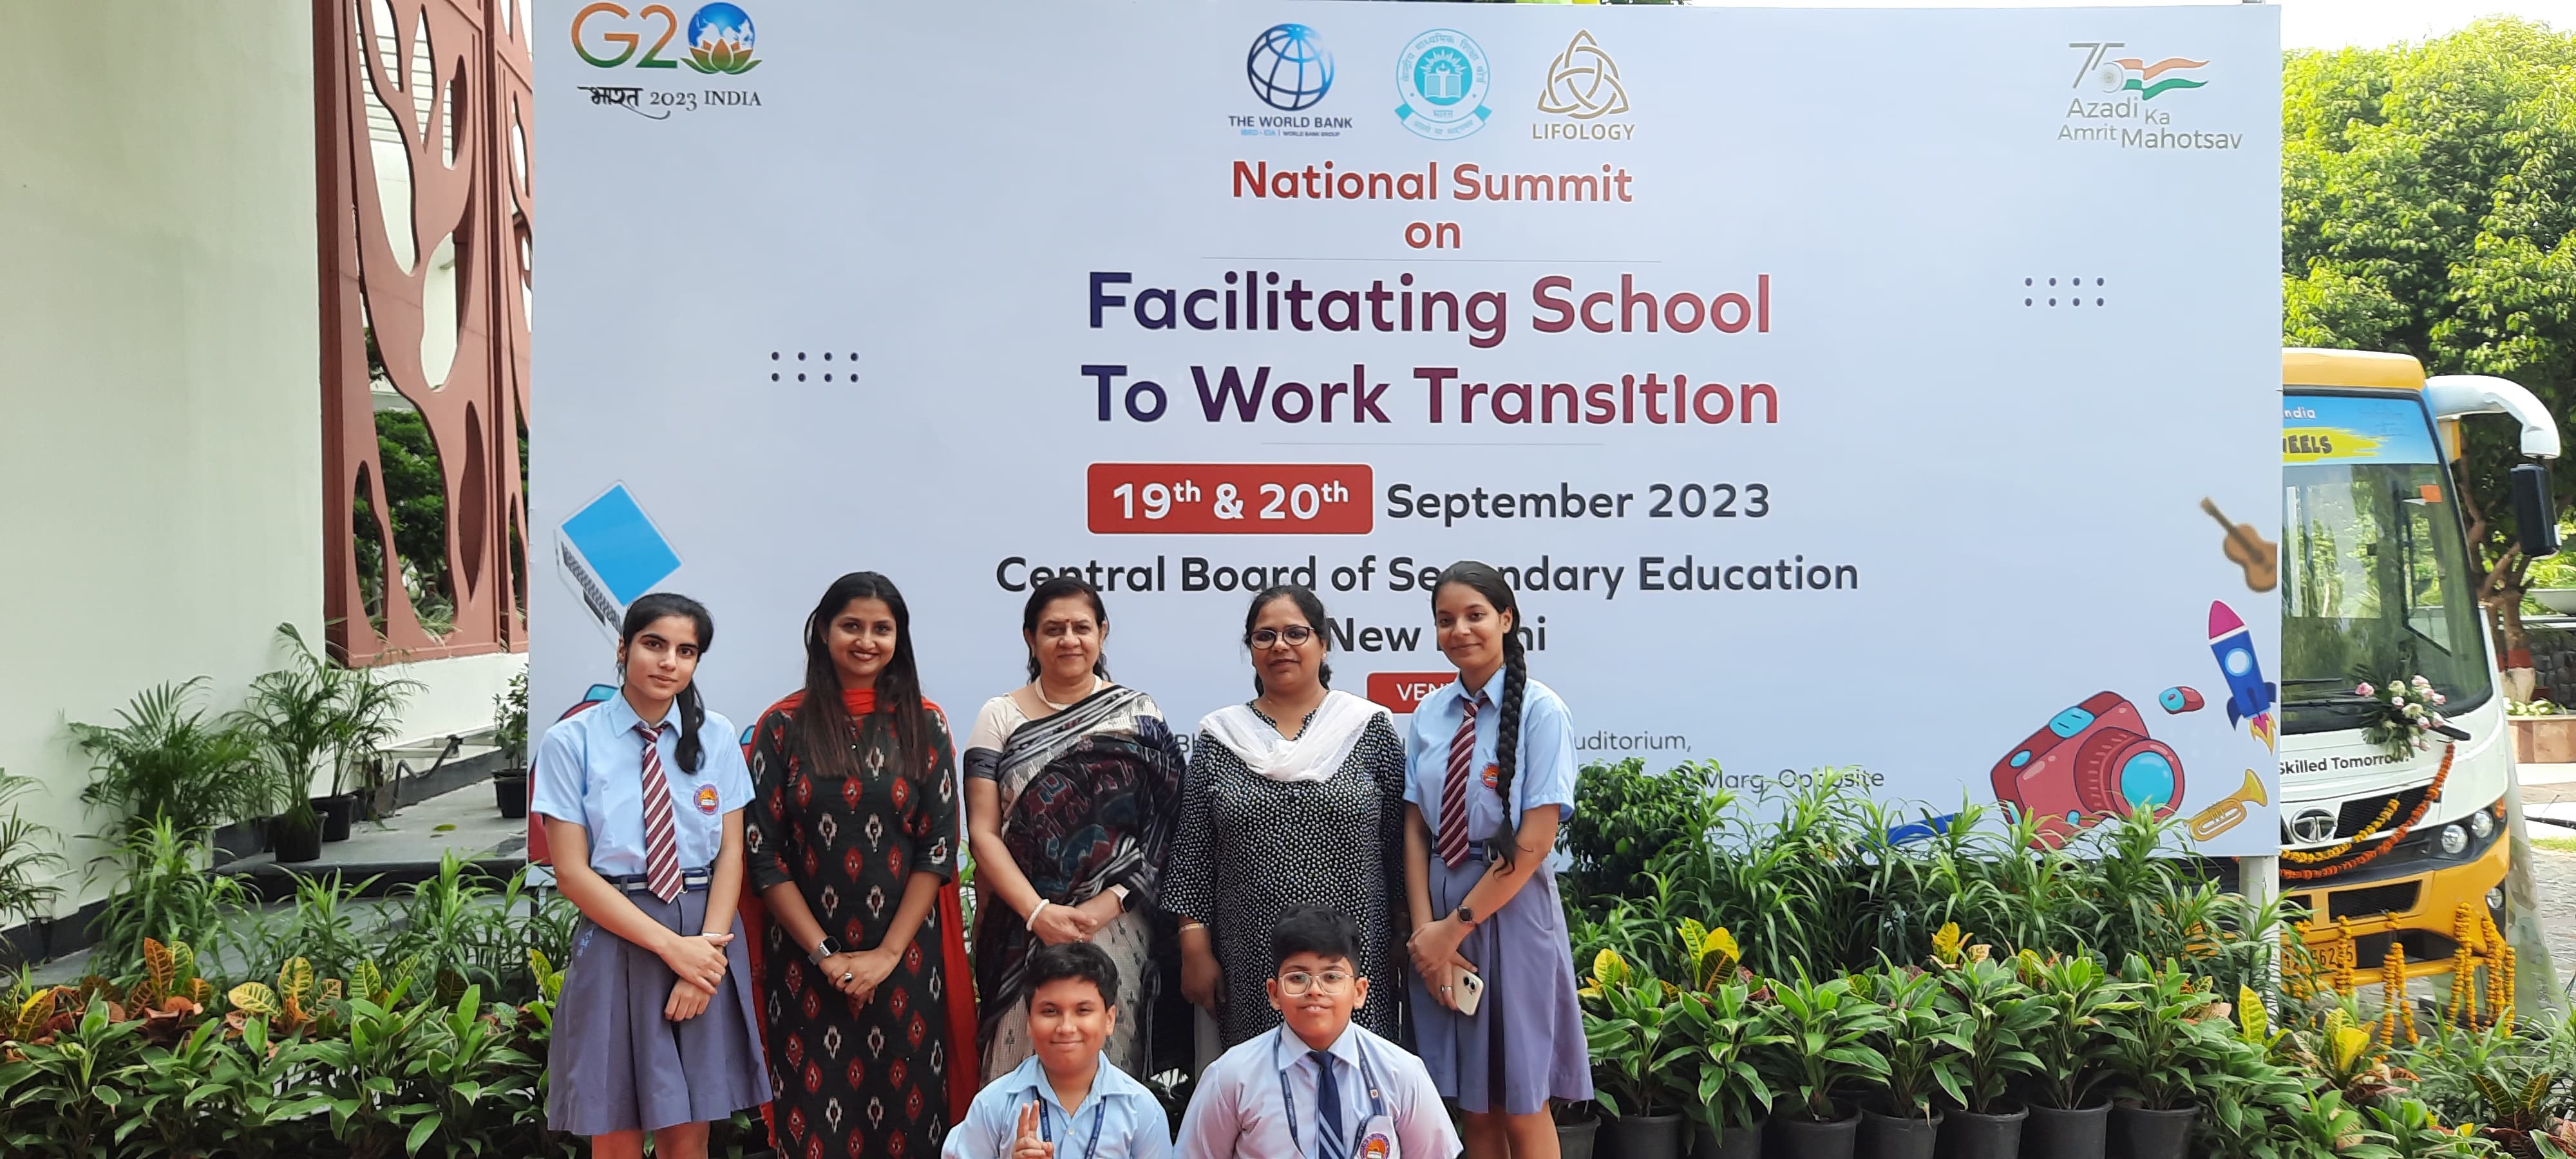 National Summit on Facilitating School to Work Transition